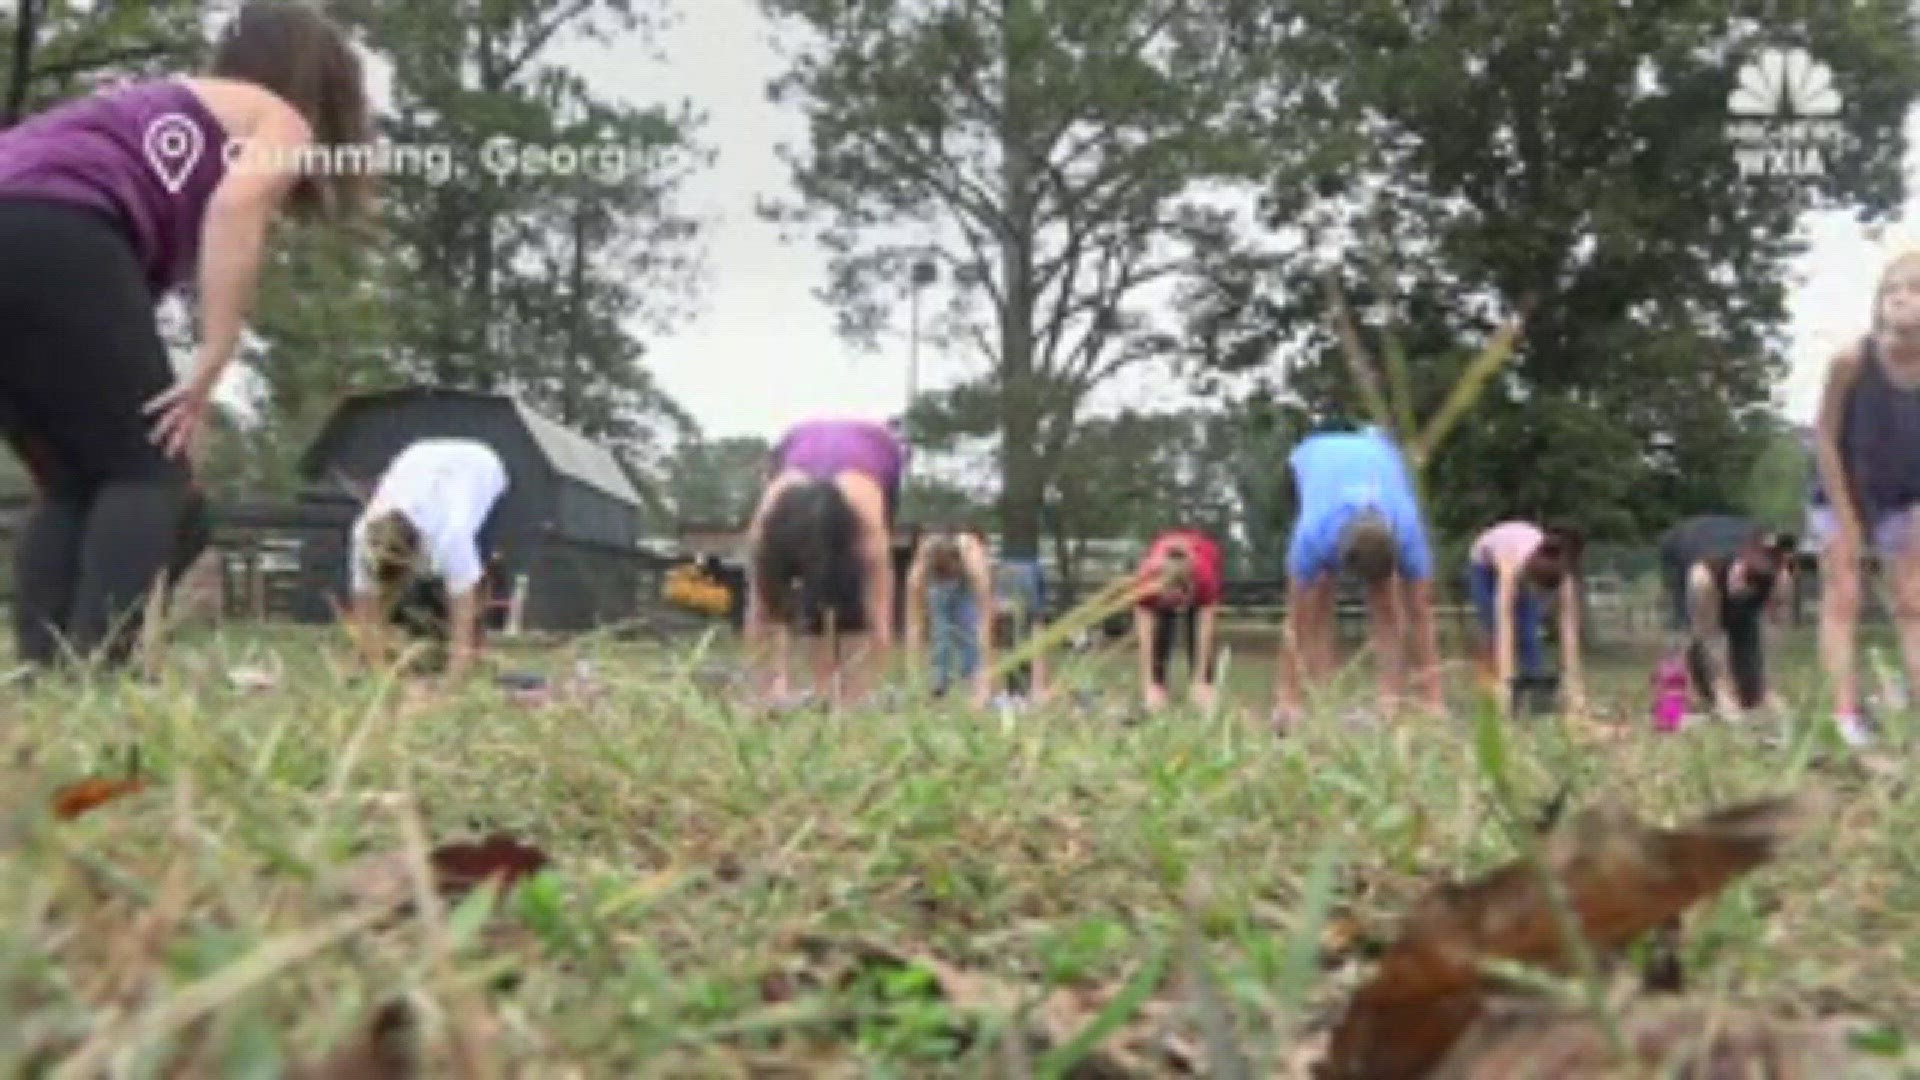 A Georgia horse rescue group has turned 'Namaste' into 'Namast-hay' with their new horseback yoga class.